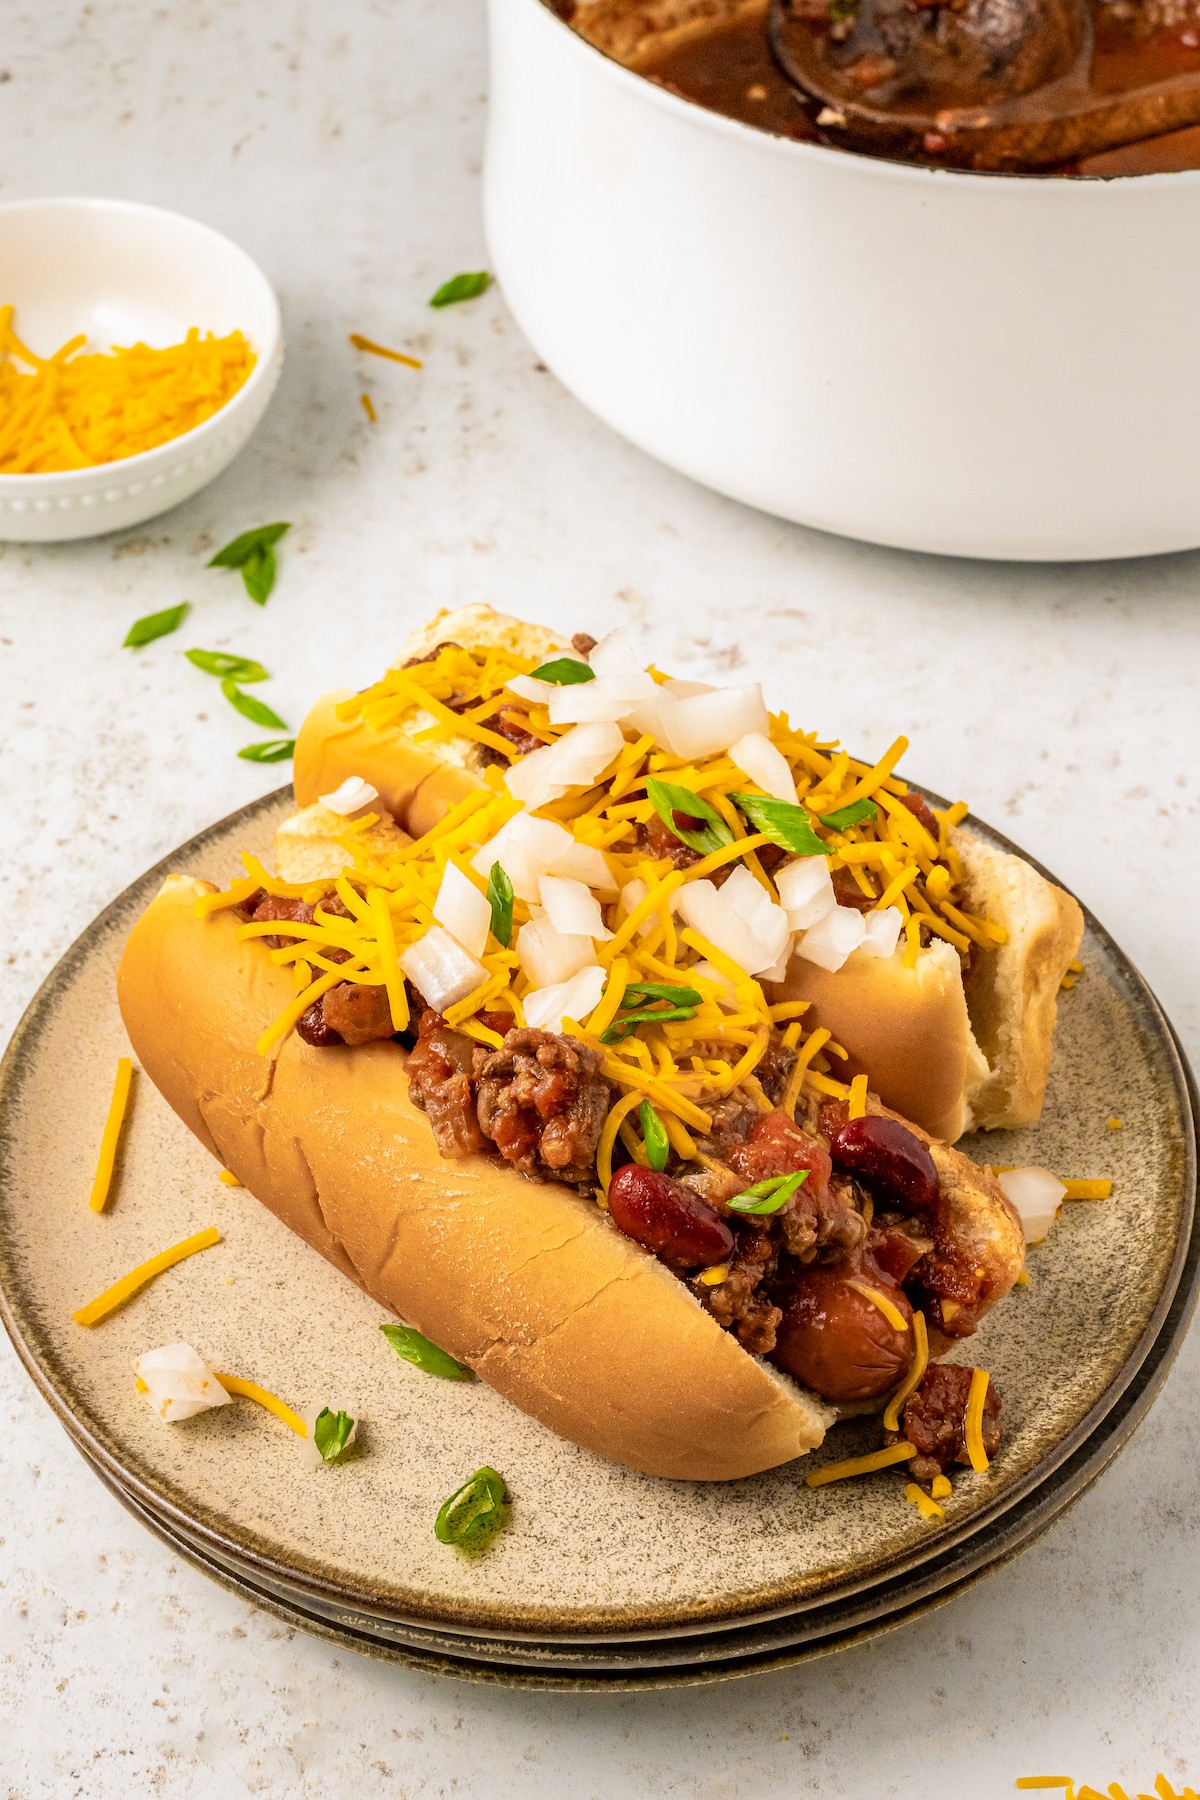 Chili dogs on a plate with toppings.